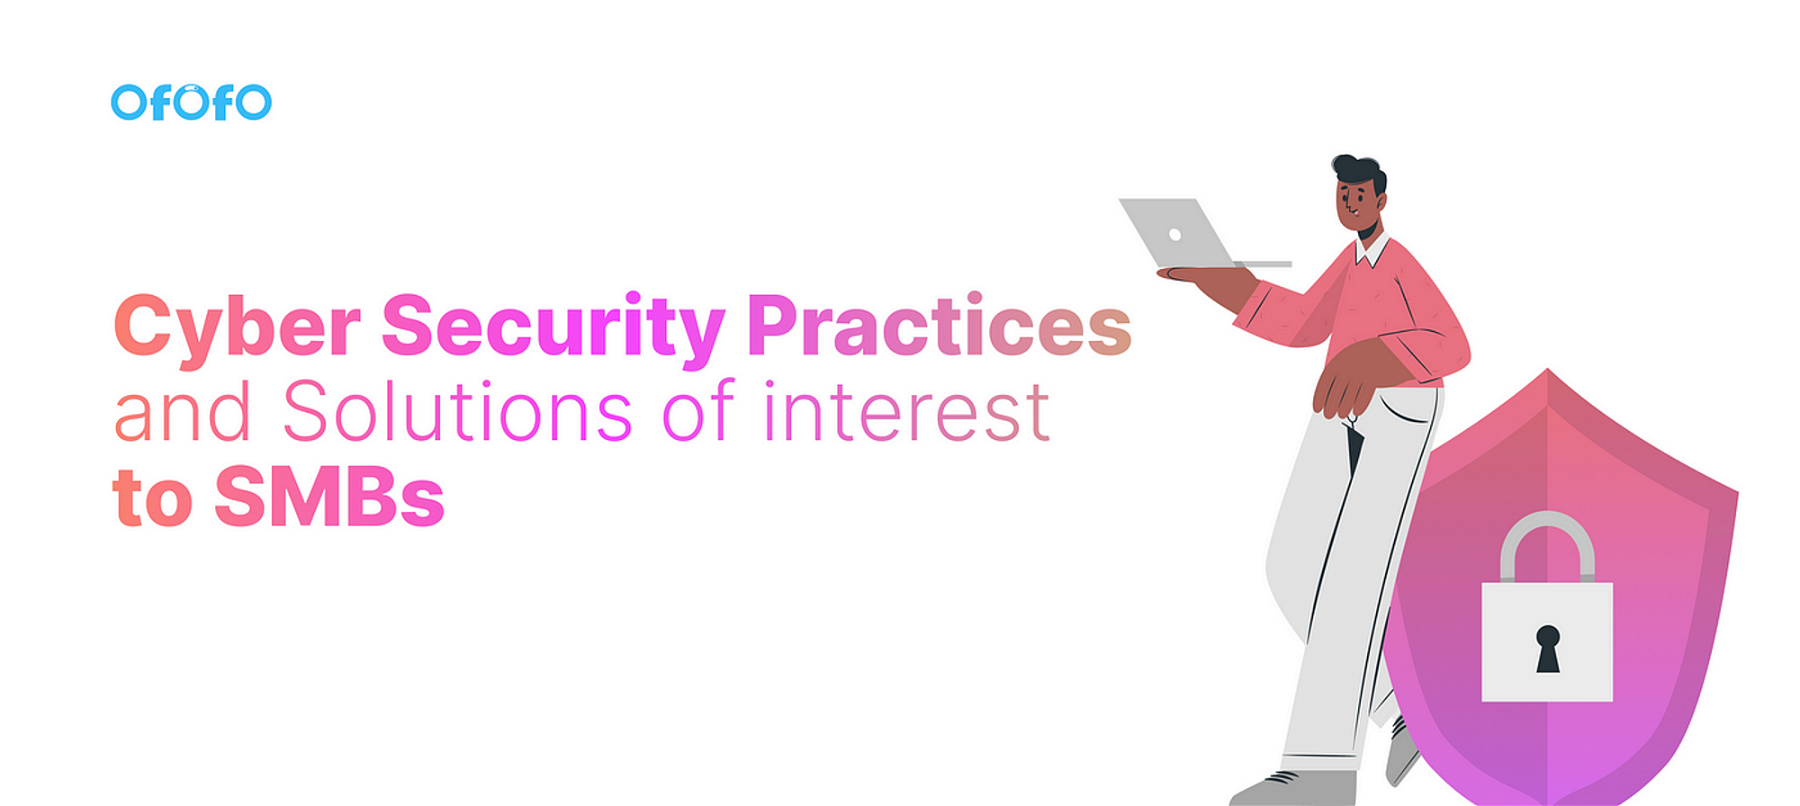 Cyber Security Practices and Solutions of interest to SMBs